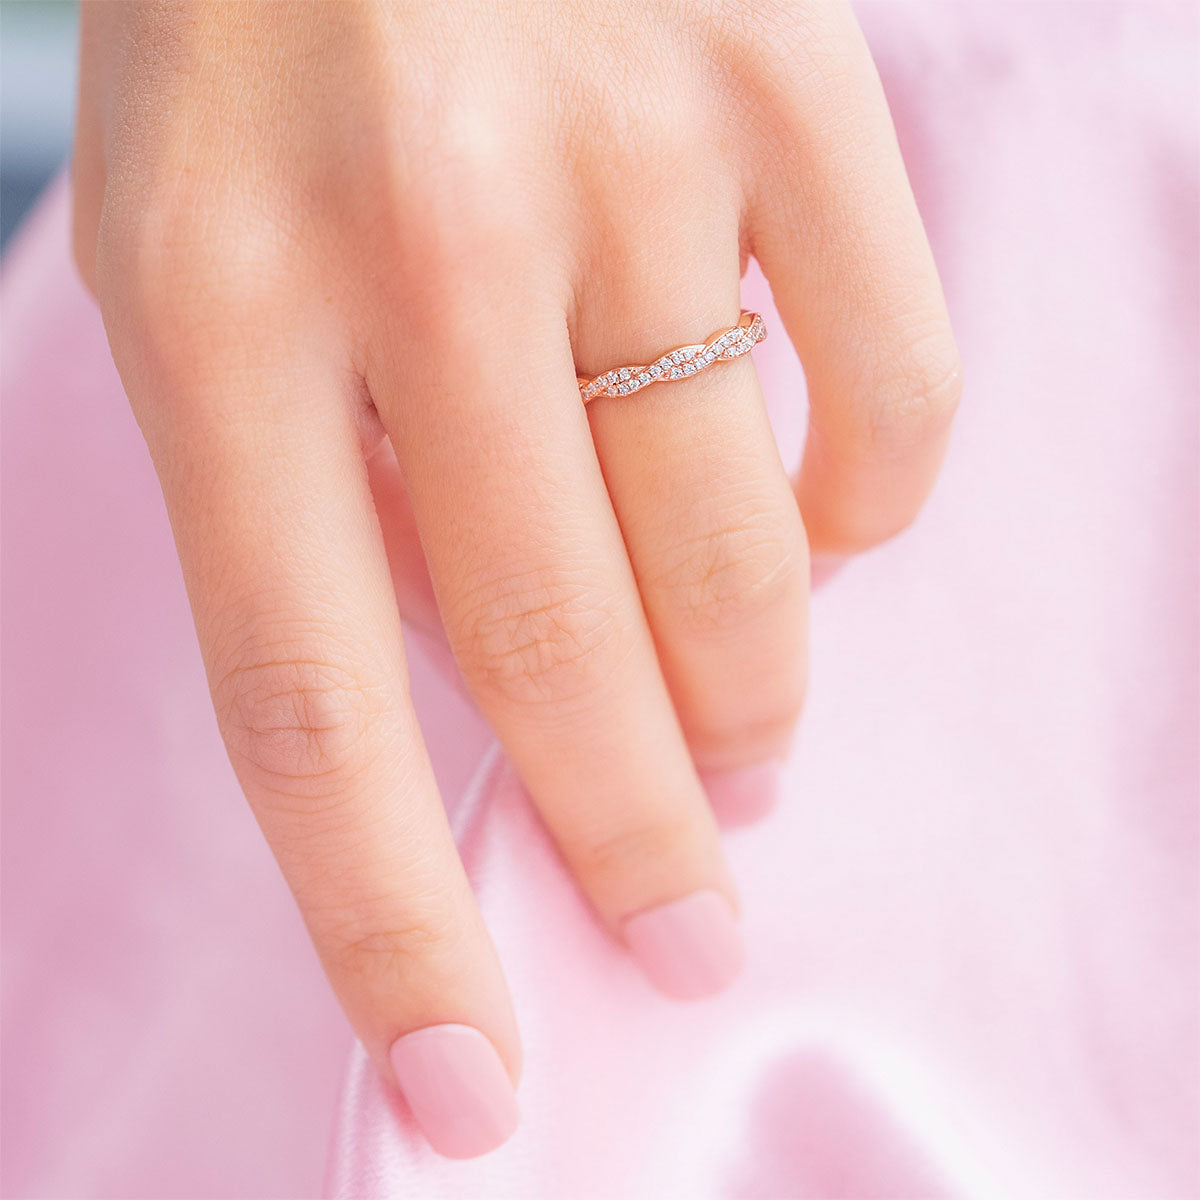 Woman wearing rose gold twisted wedding band